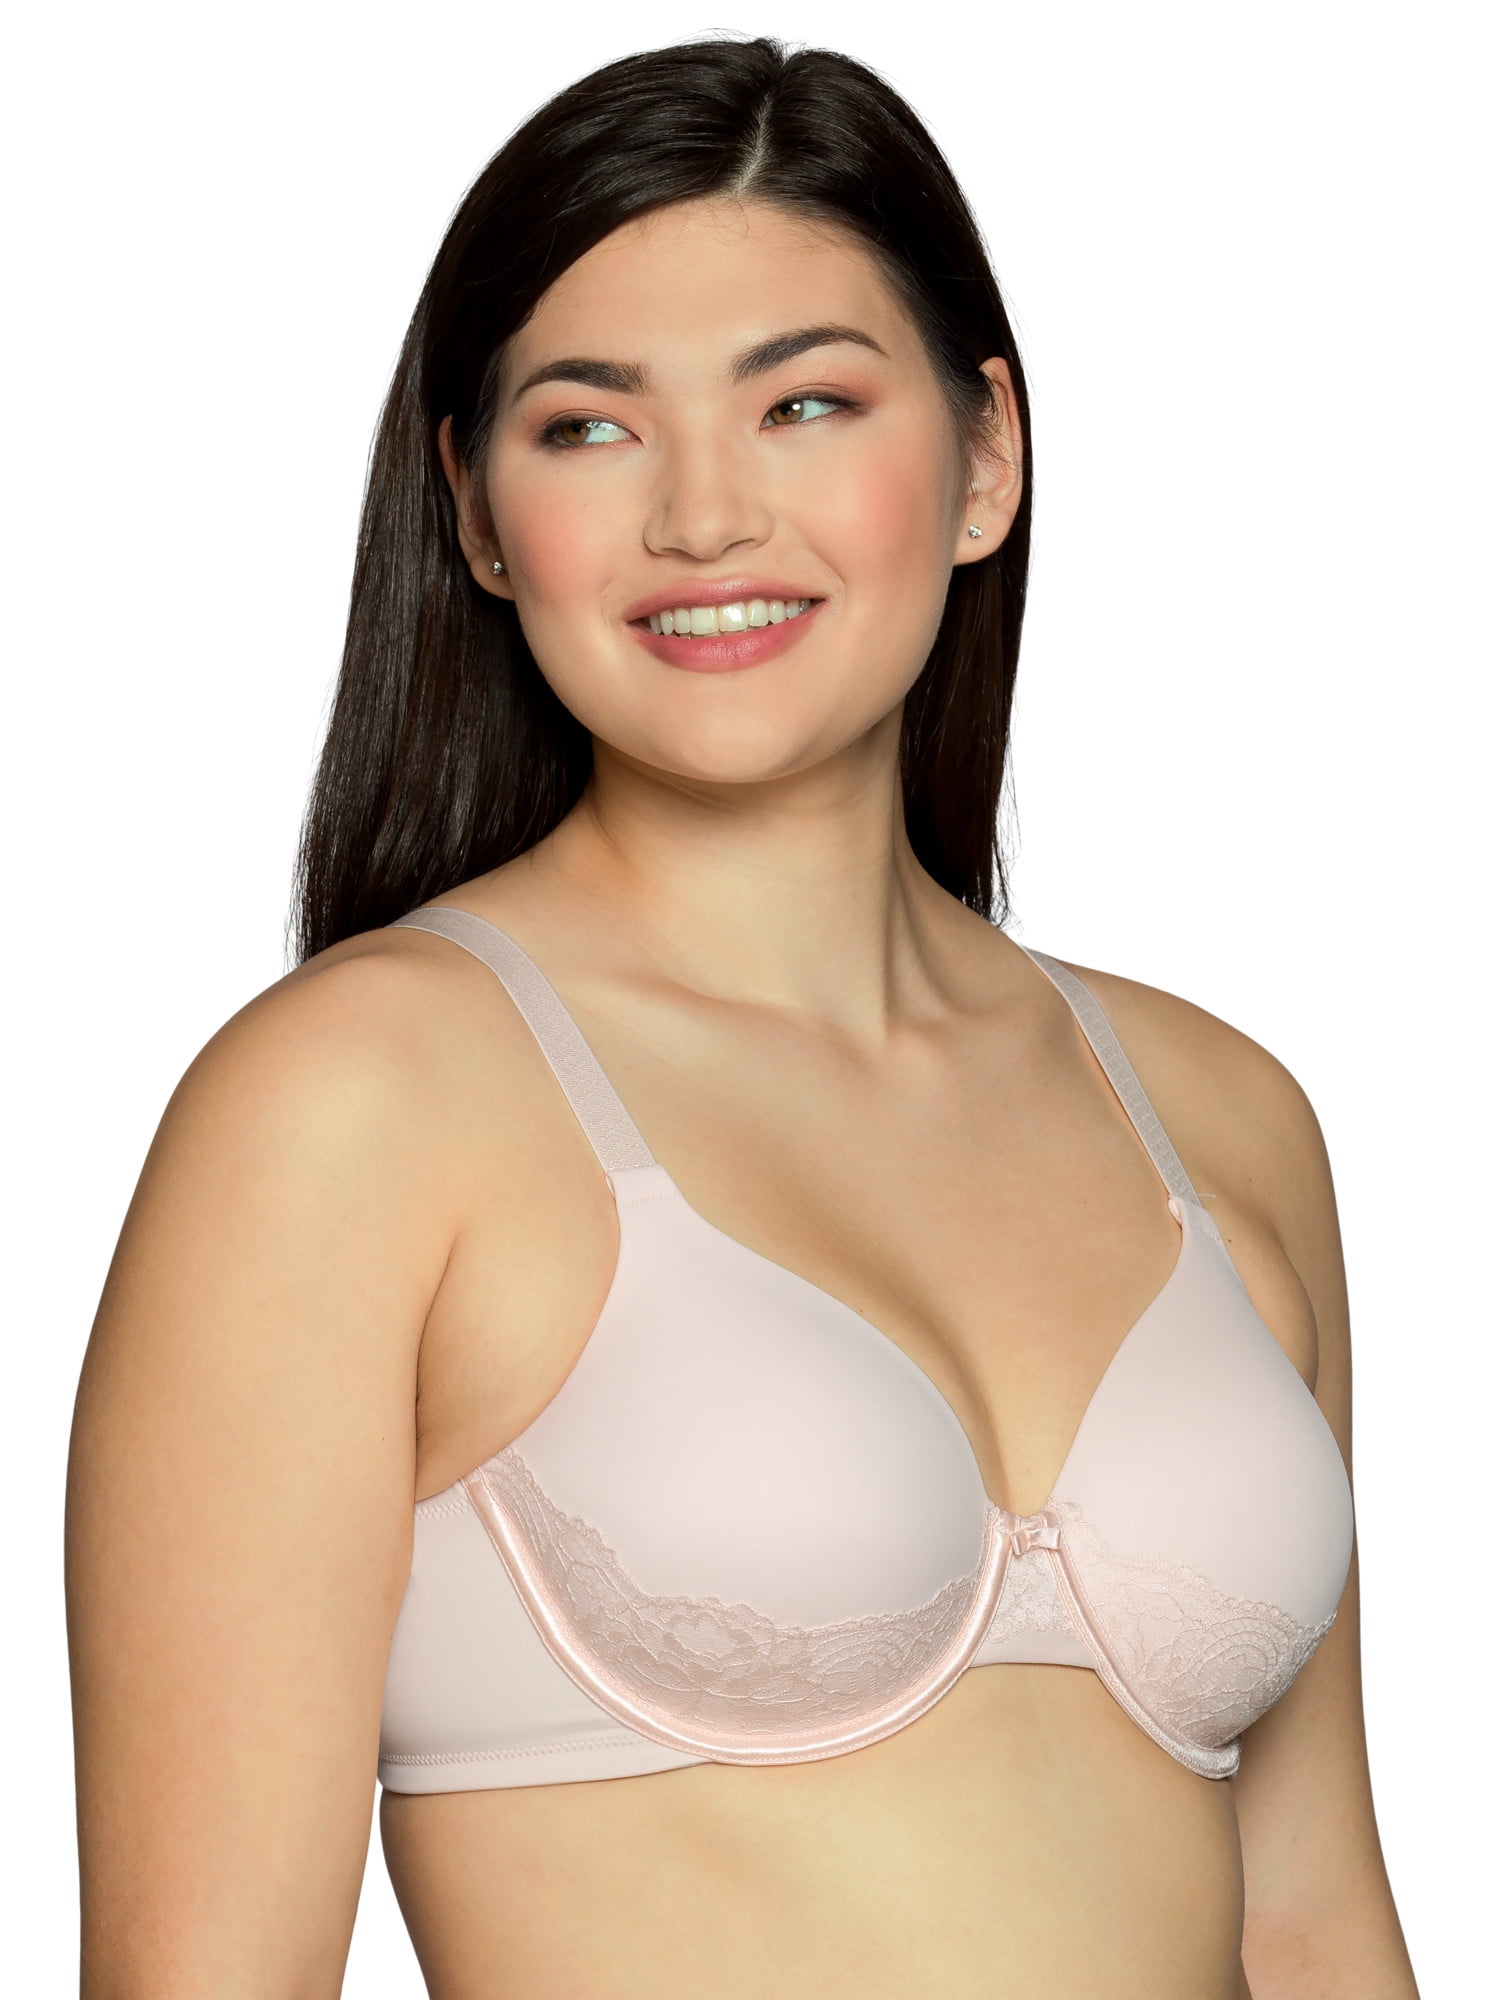 Vanity Fair Radiant Collection Women's Smoothing Minimizer Bra, Style  3476084 